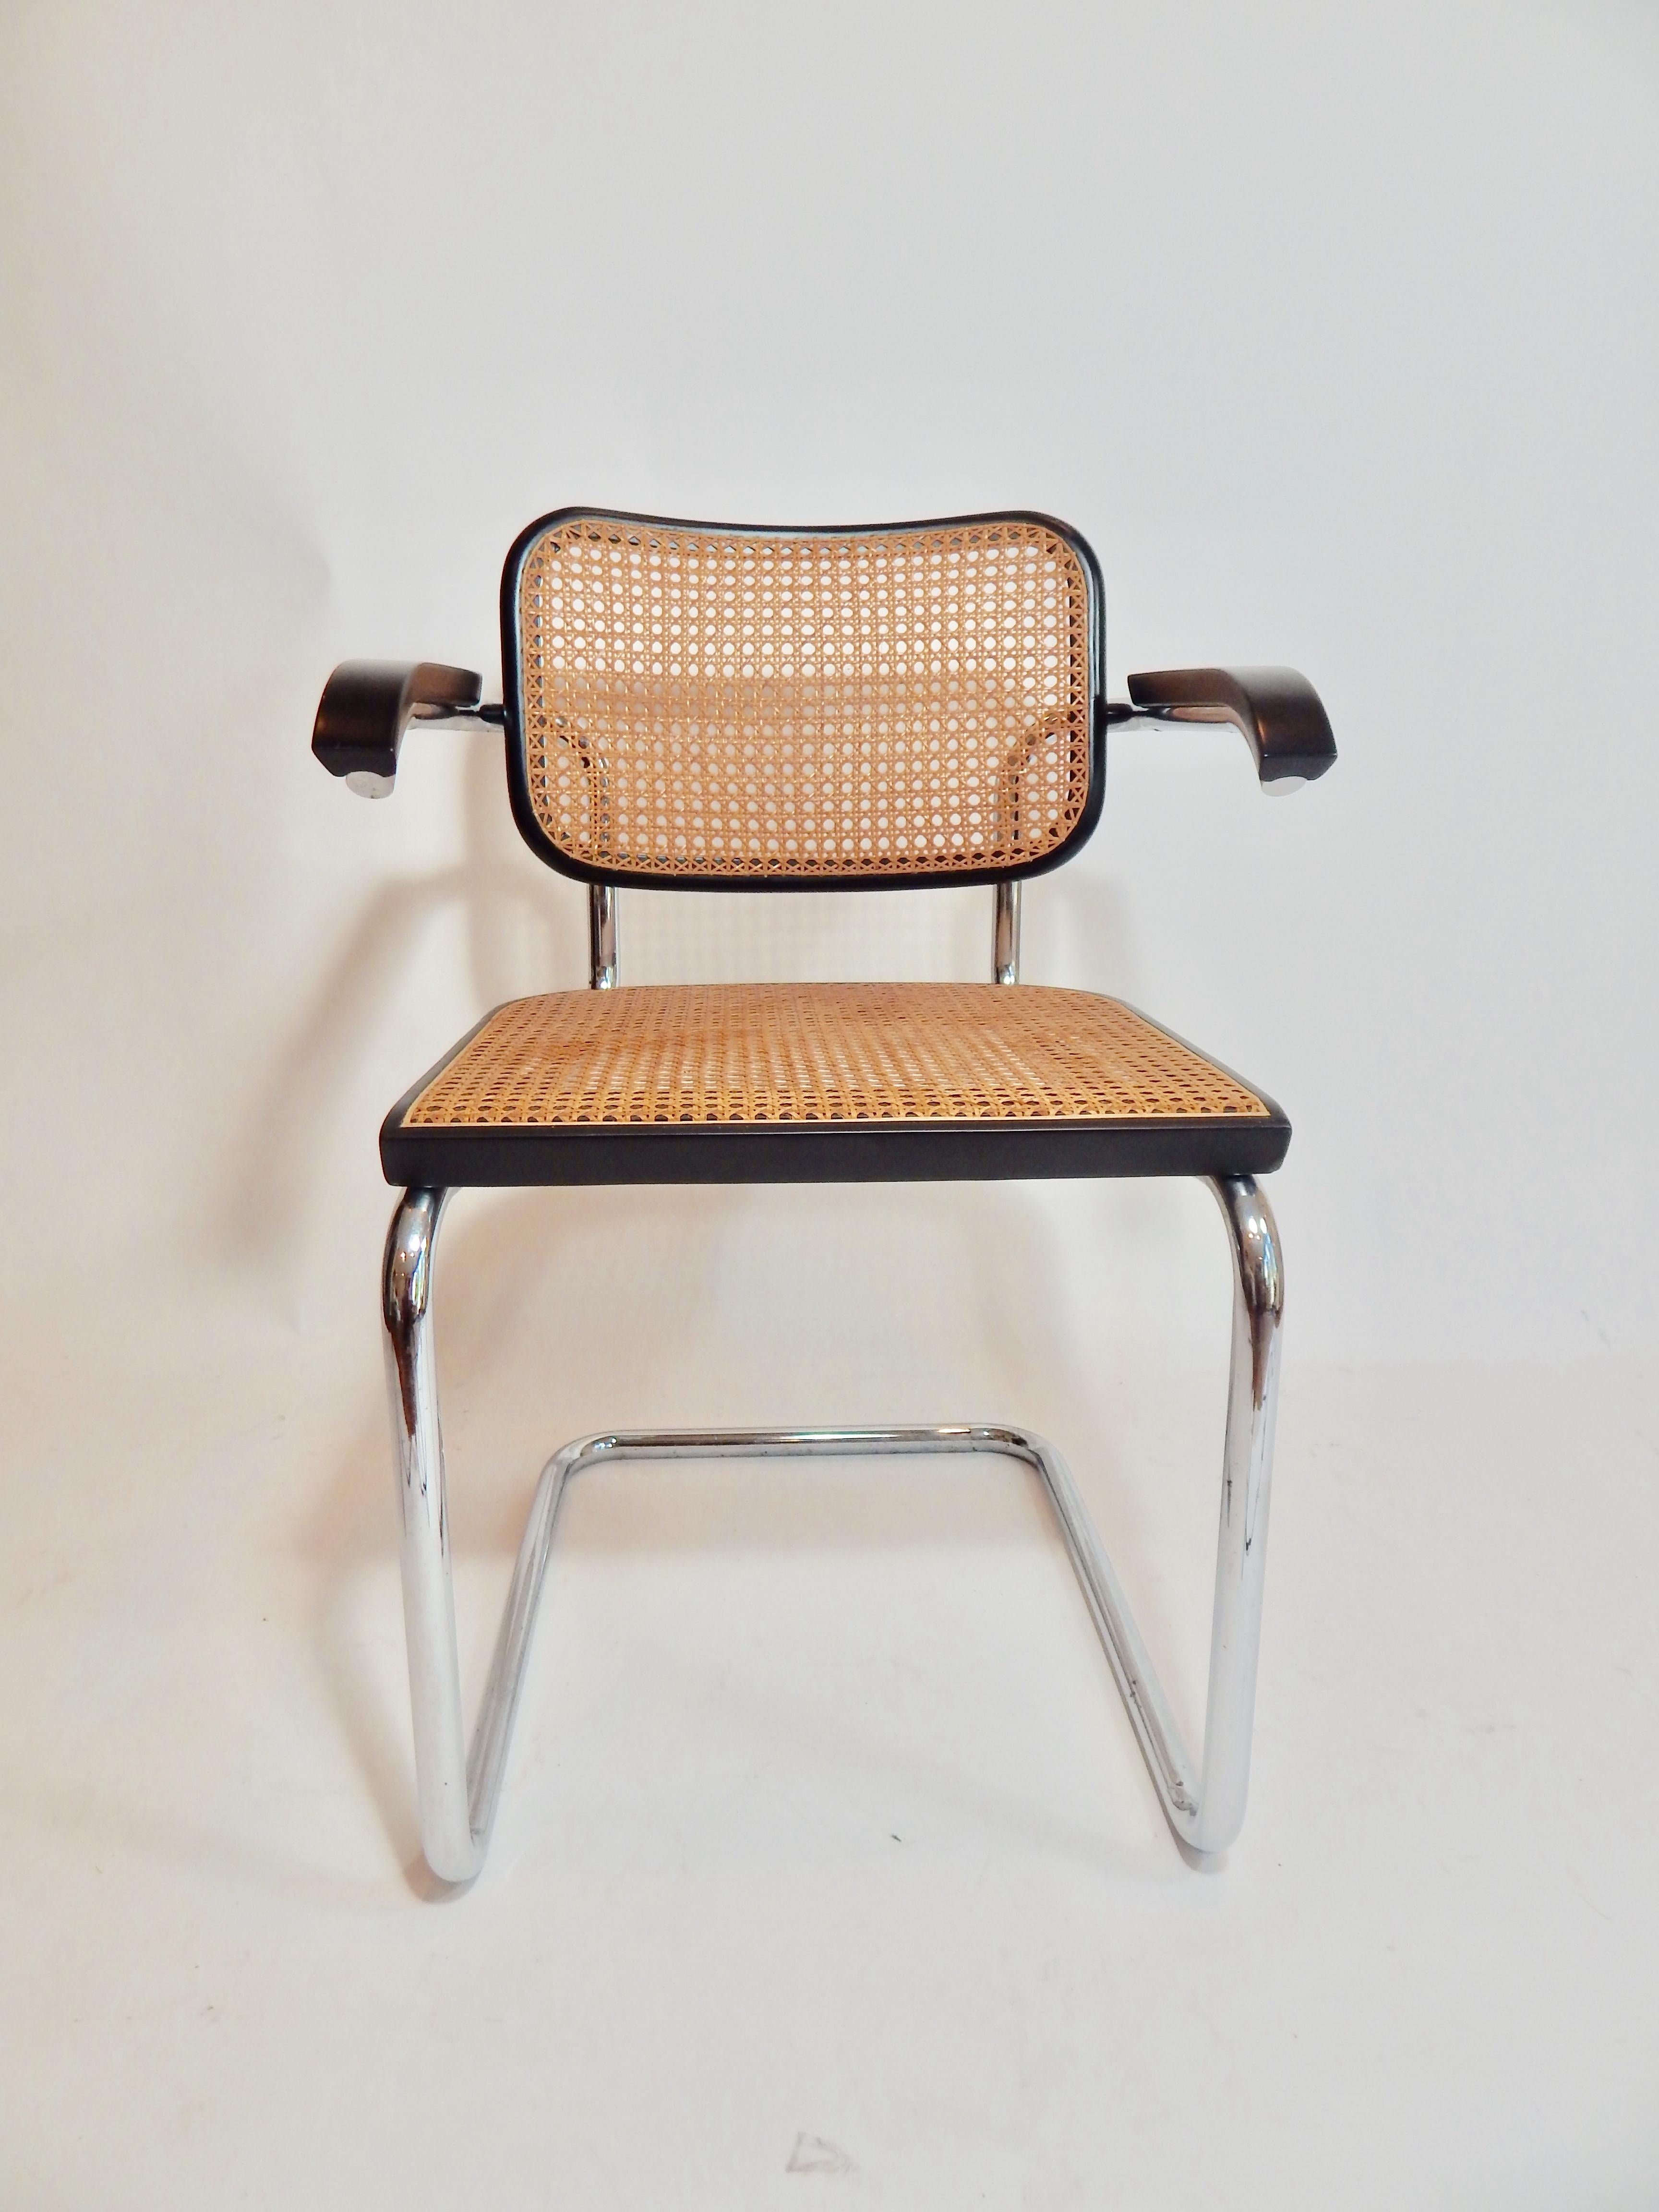 Midcentury 1970s Marcel Breuer Cesca armchair produced by Knoll. Very good condition with exception of exhibiting some minor blemishes.